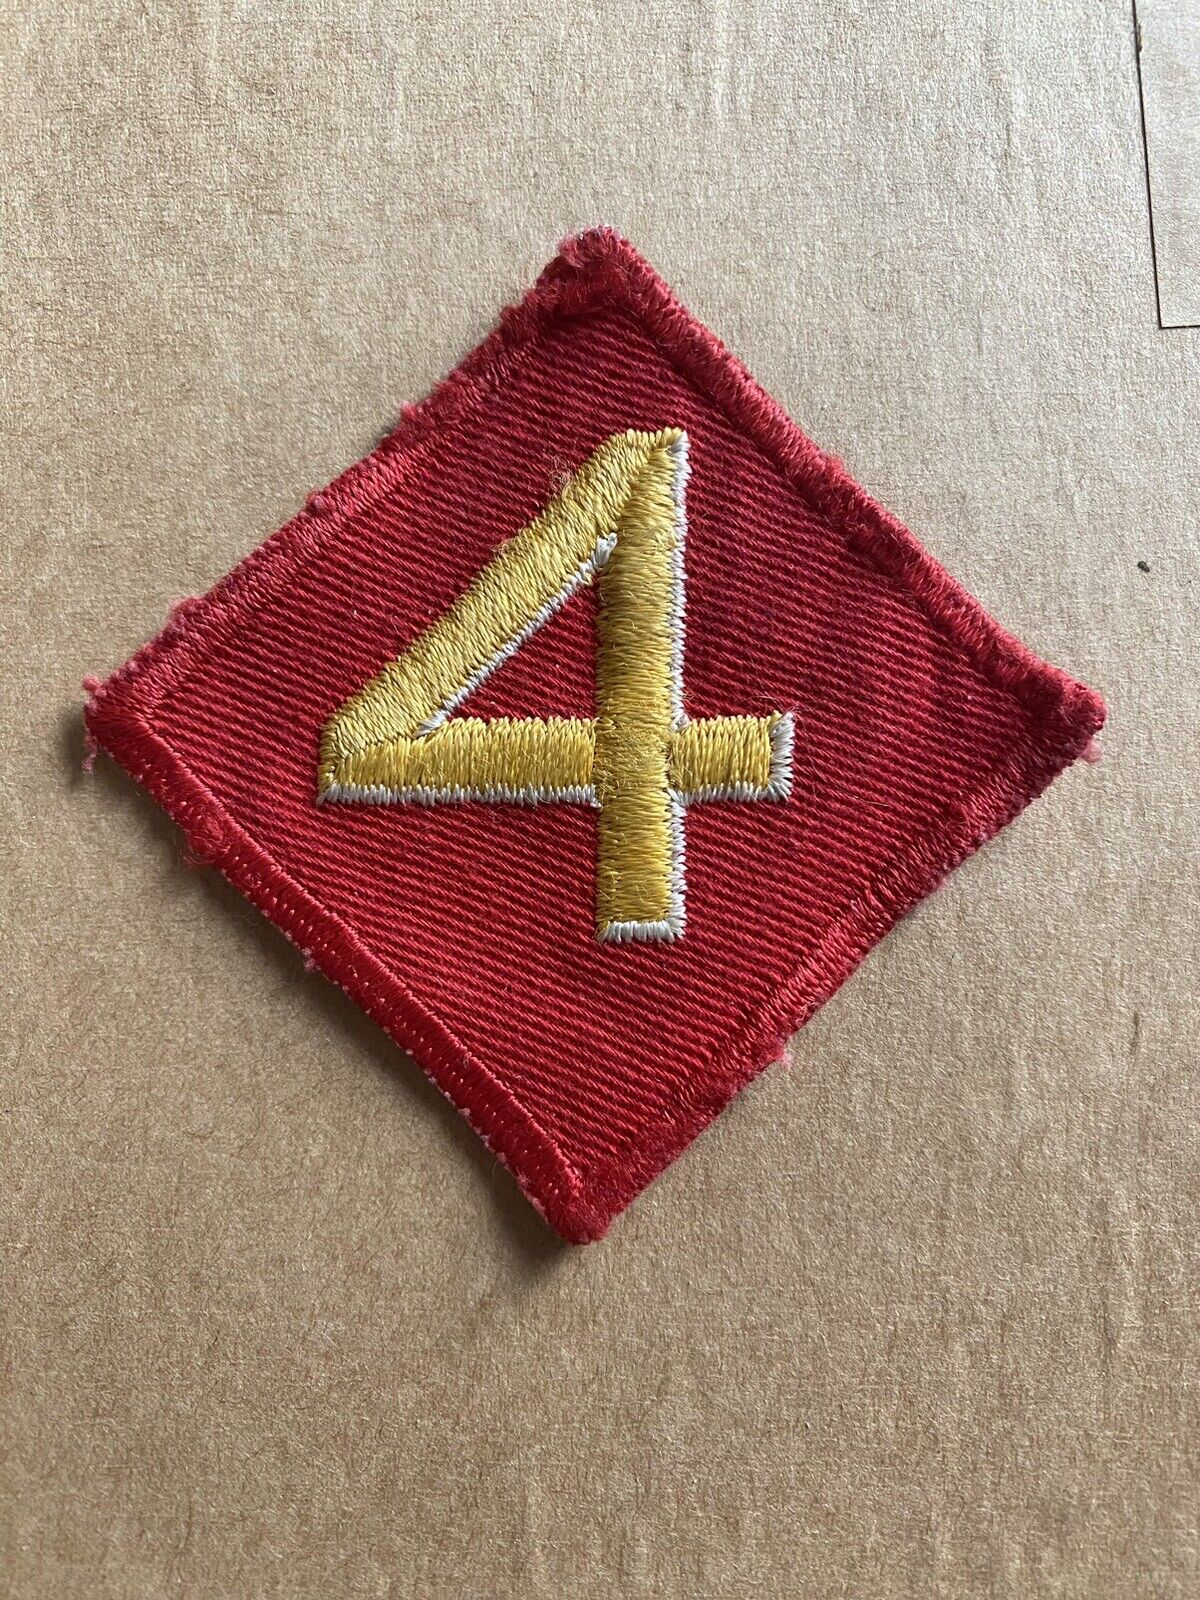 4th Marine Corps Division Shoulder Patch -- Stitched on Twill -- Original WWII